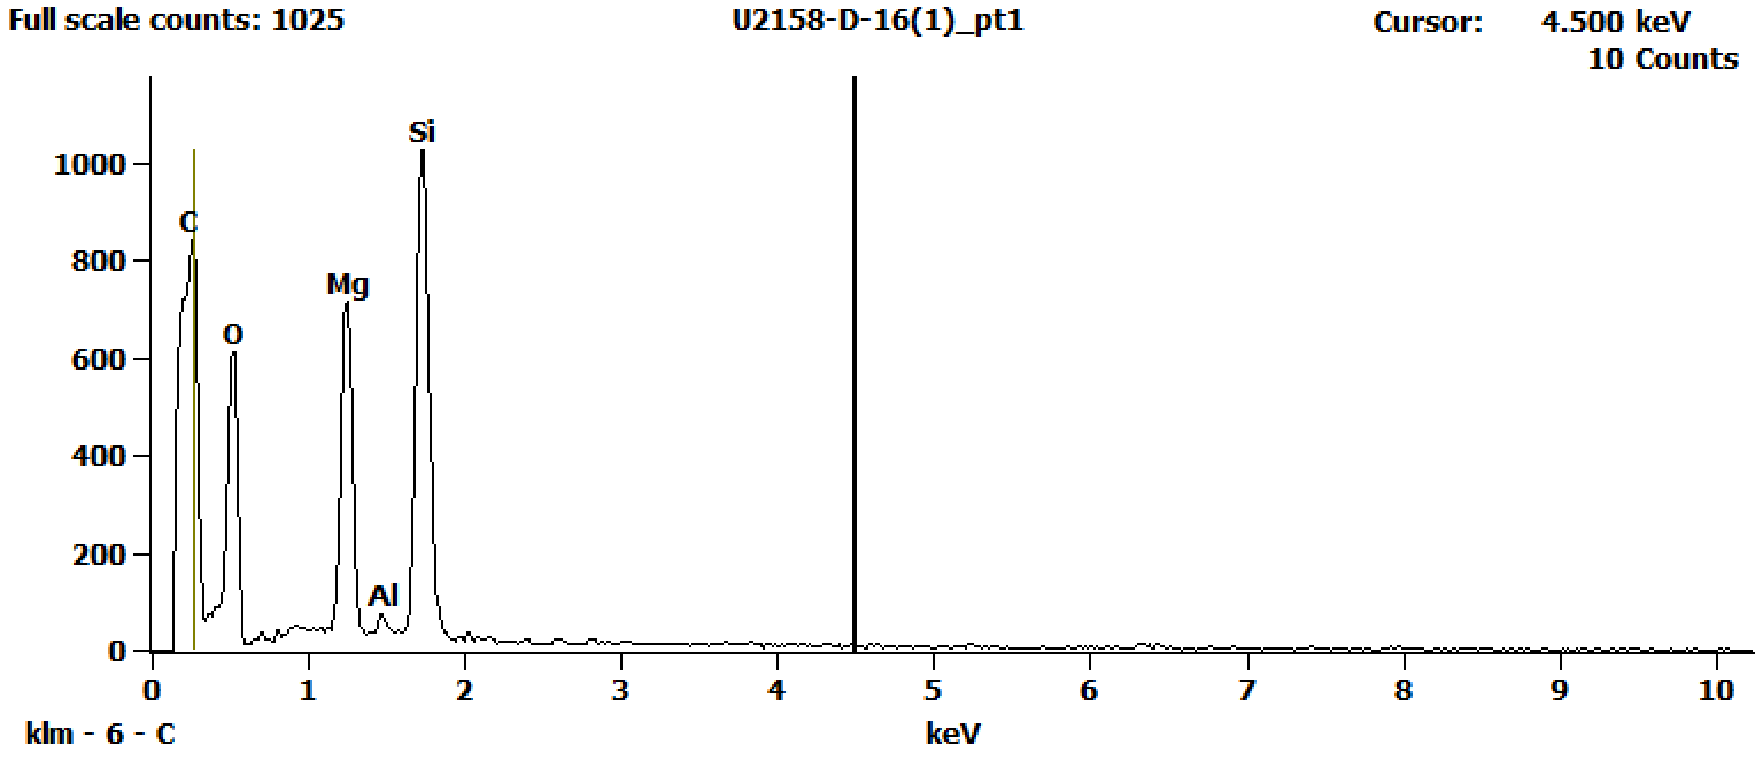 EDS Spectra for sample U2158-D-16 taken at test area 1. The test area is labeled in the particle SEM photo.